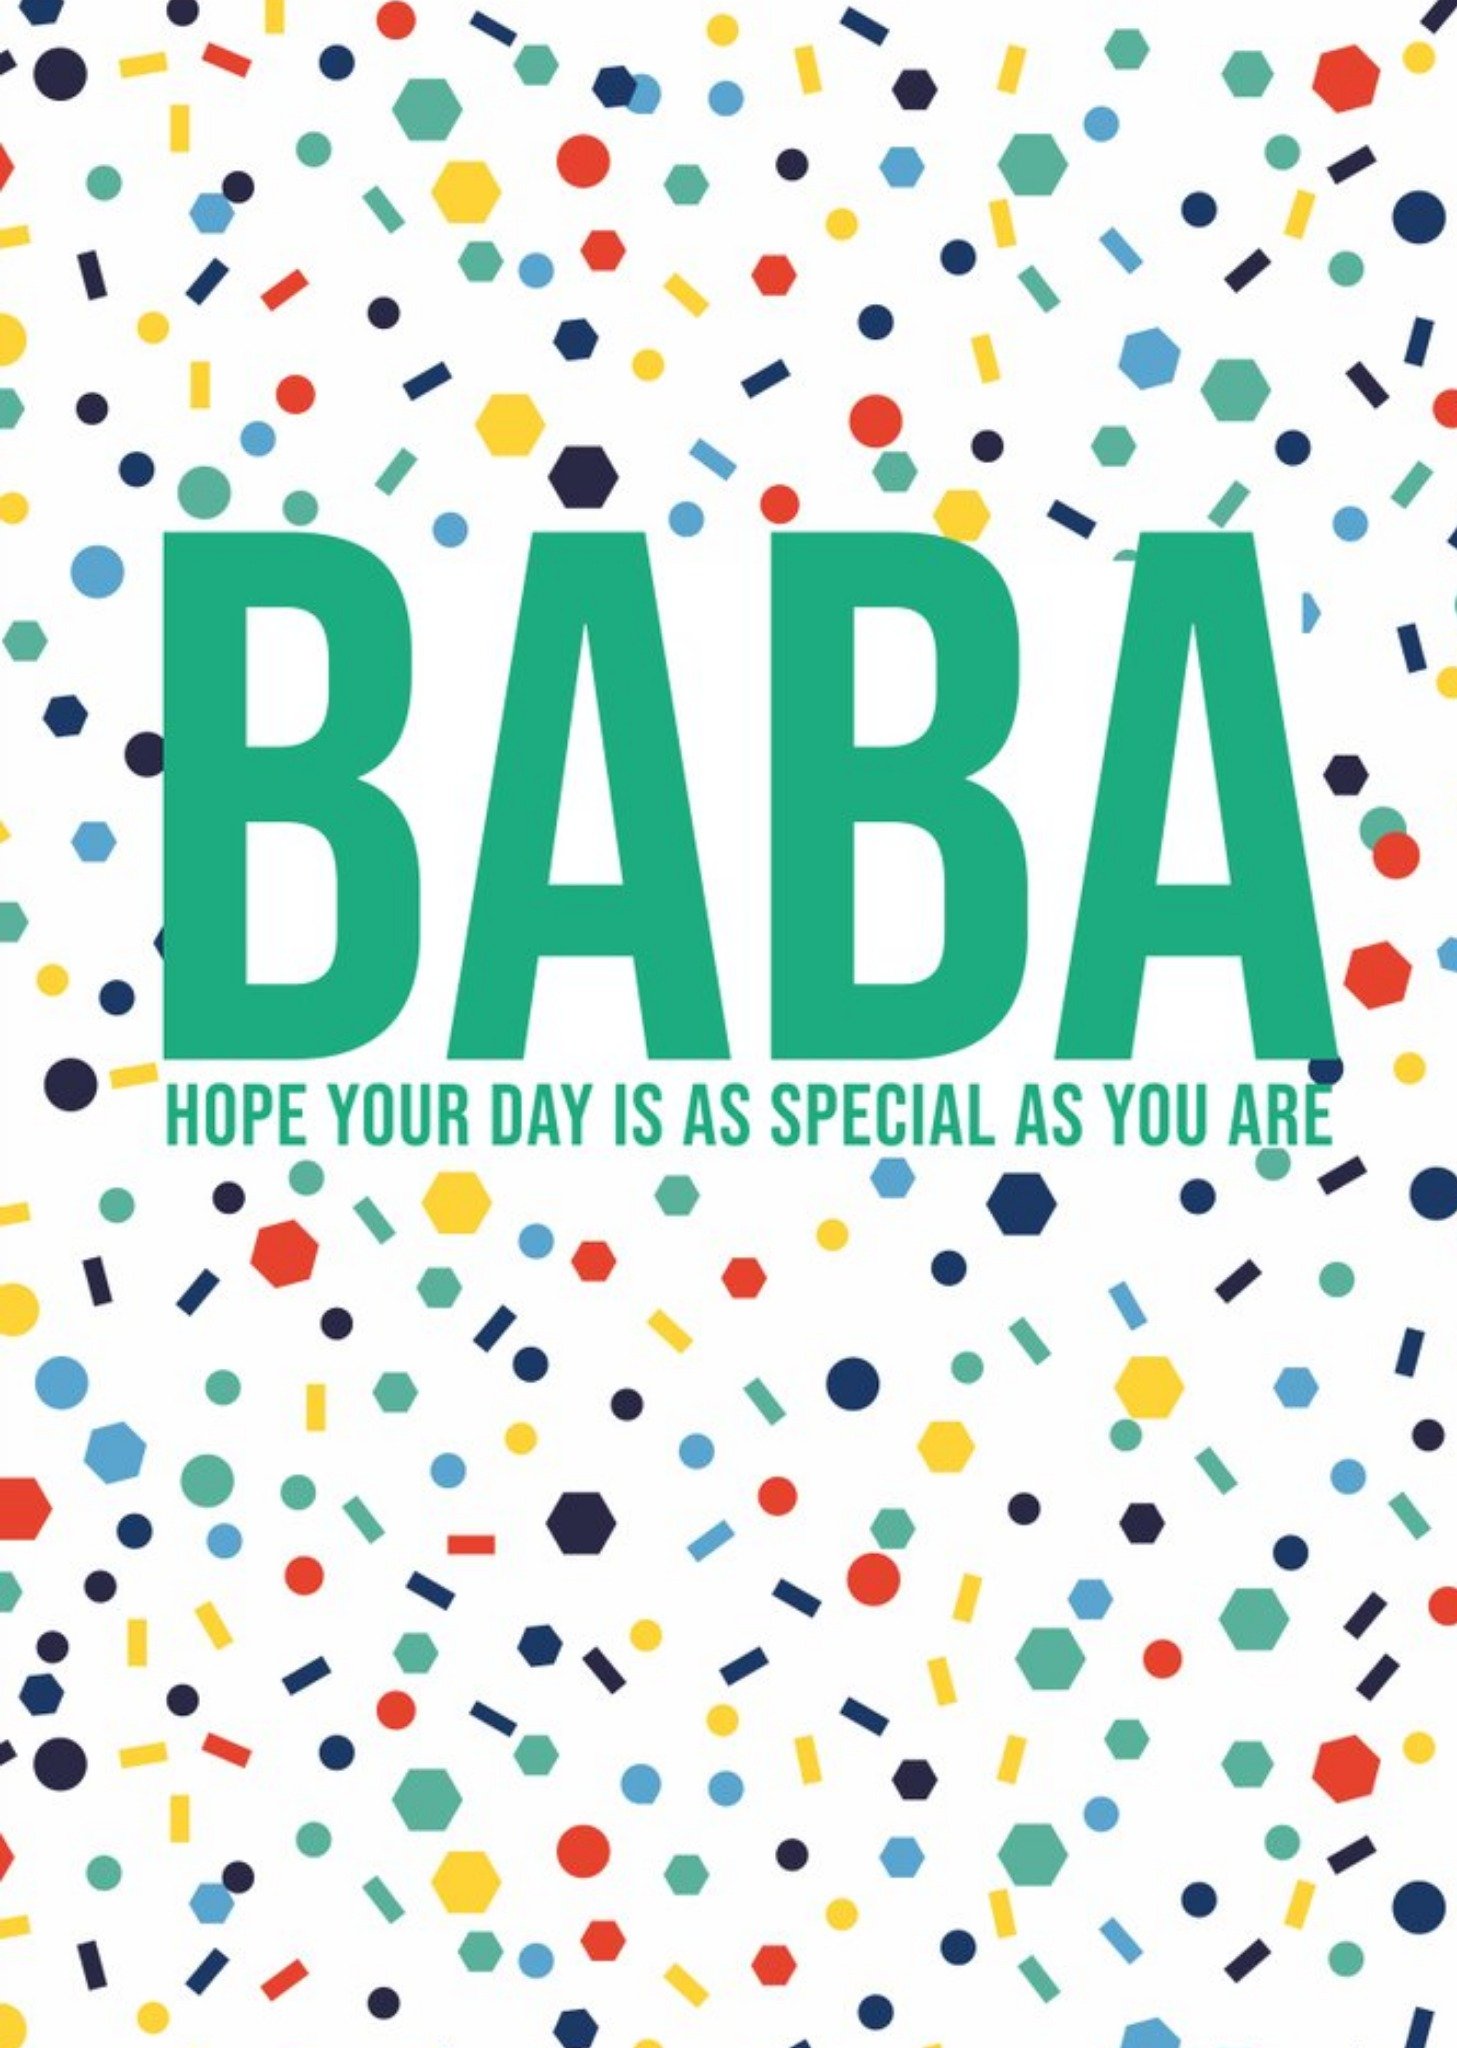 Eastern Print Studio Babba Hope Your Day Is As Special As You Are Birthday Card, Large